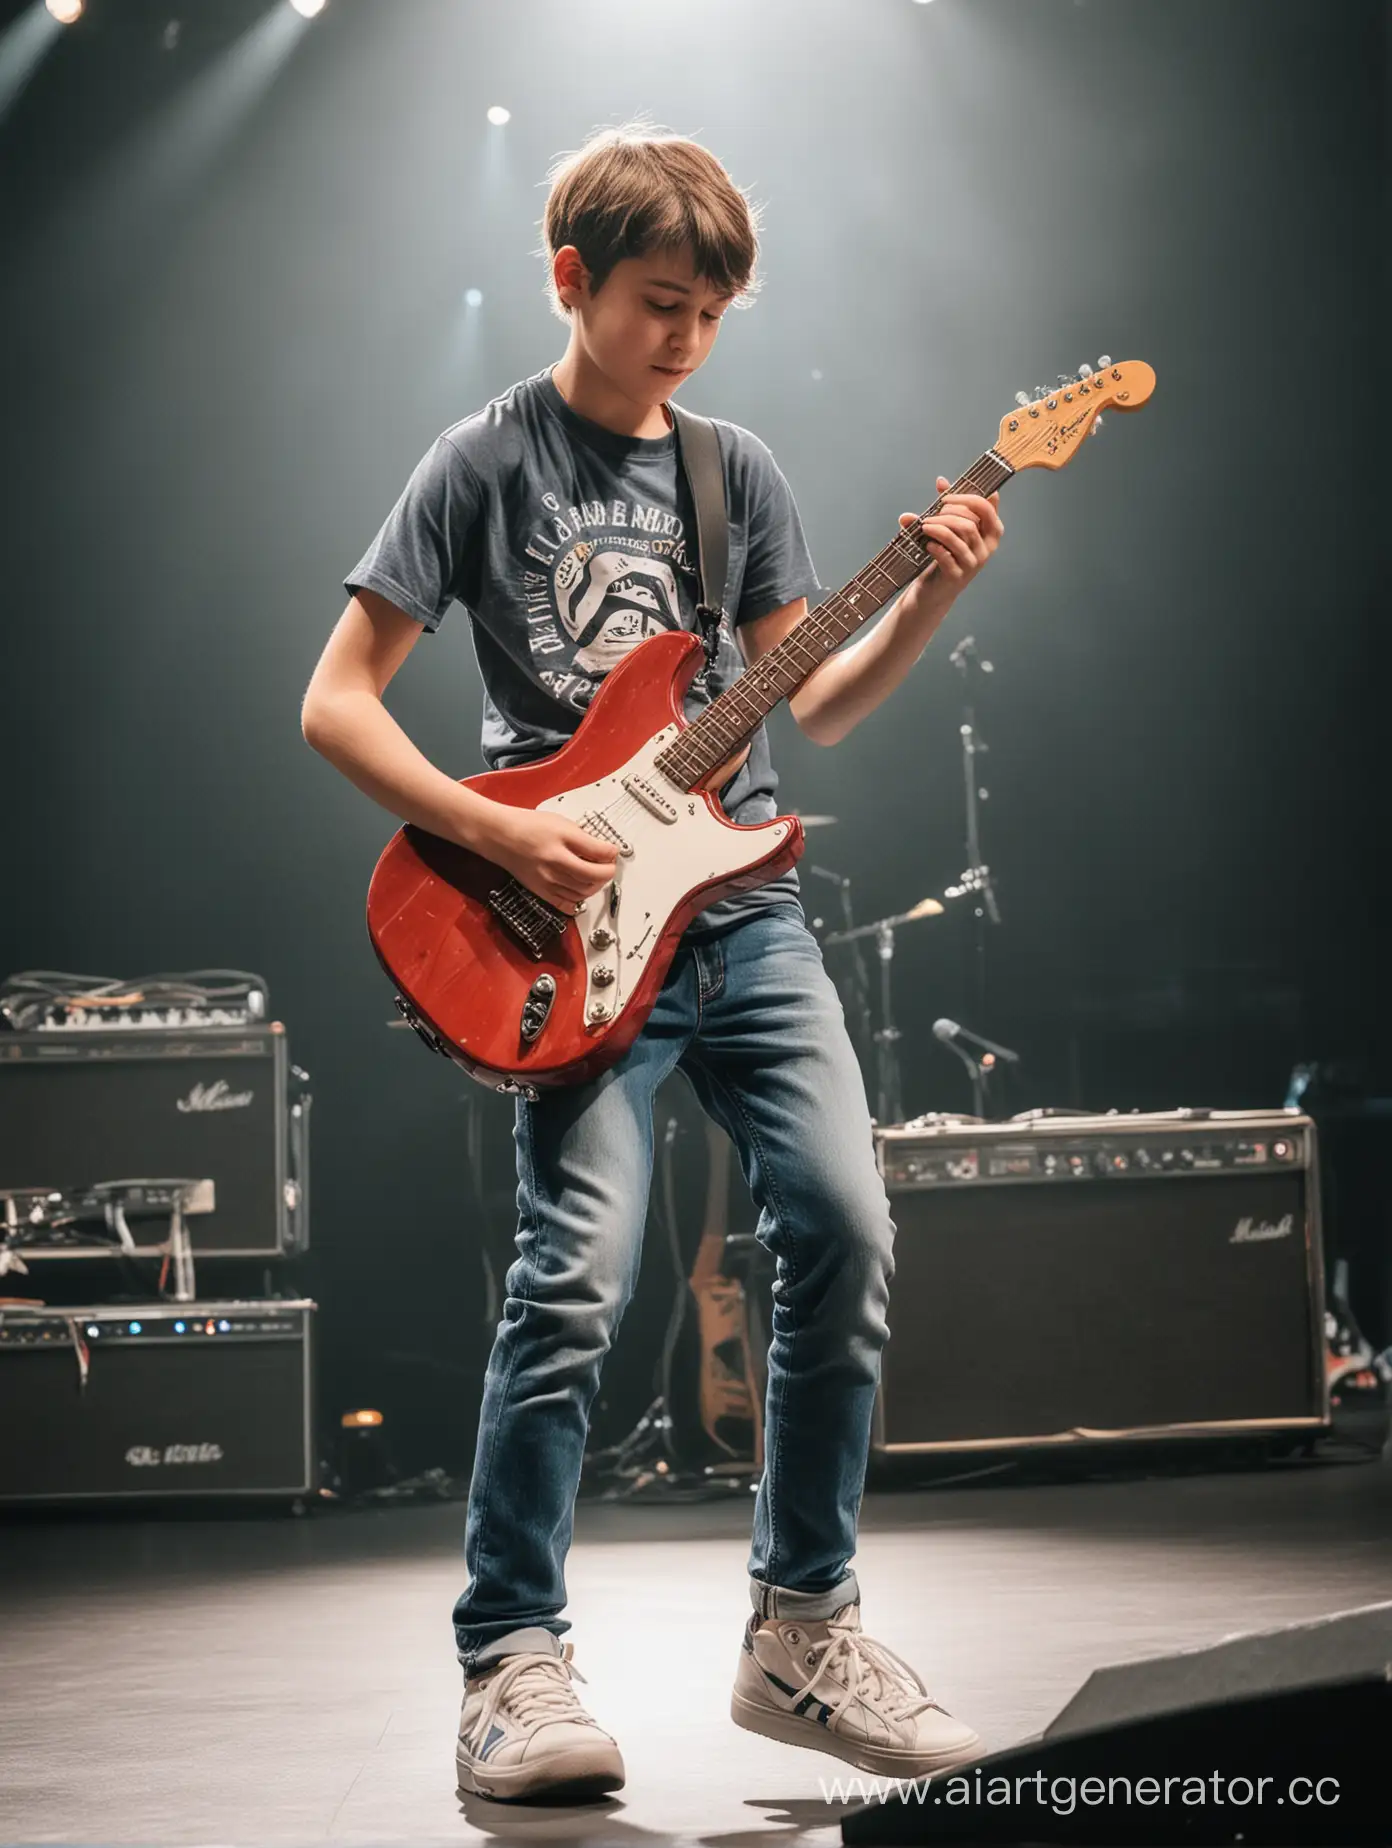 Young-Boy-Performing-Guitar-Solo-On-Stage-in-Casual-Attire